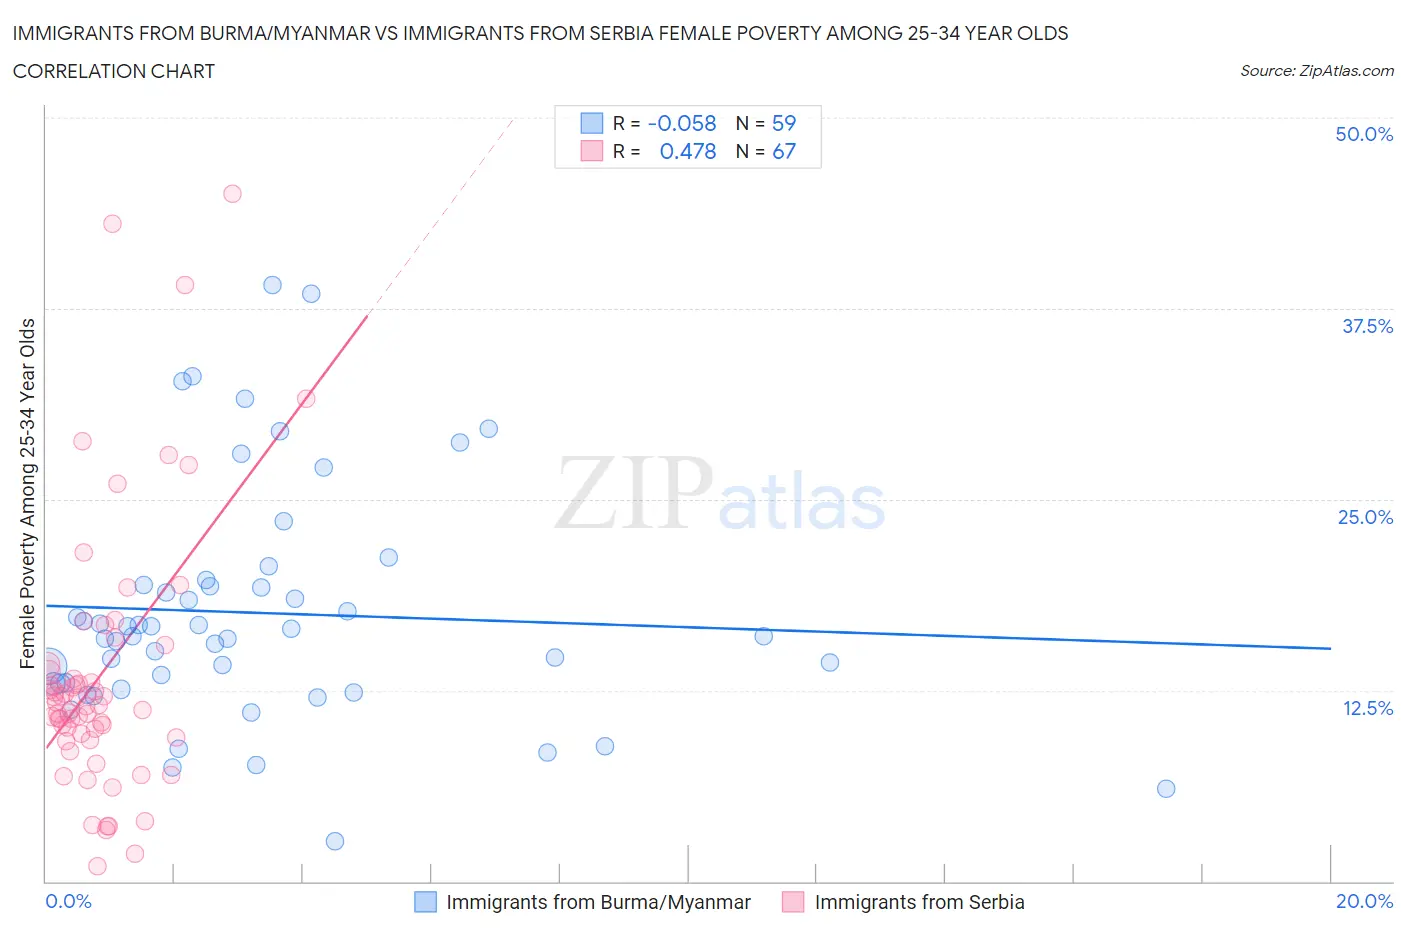 Immigrants from Burma/Myanmar vs Immigrants from Serbia Female Poverty Among 25-34 Year Olds